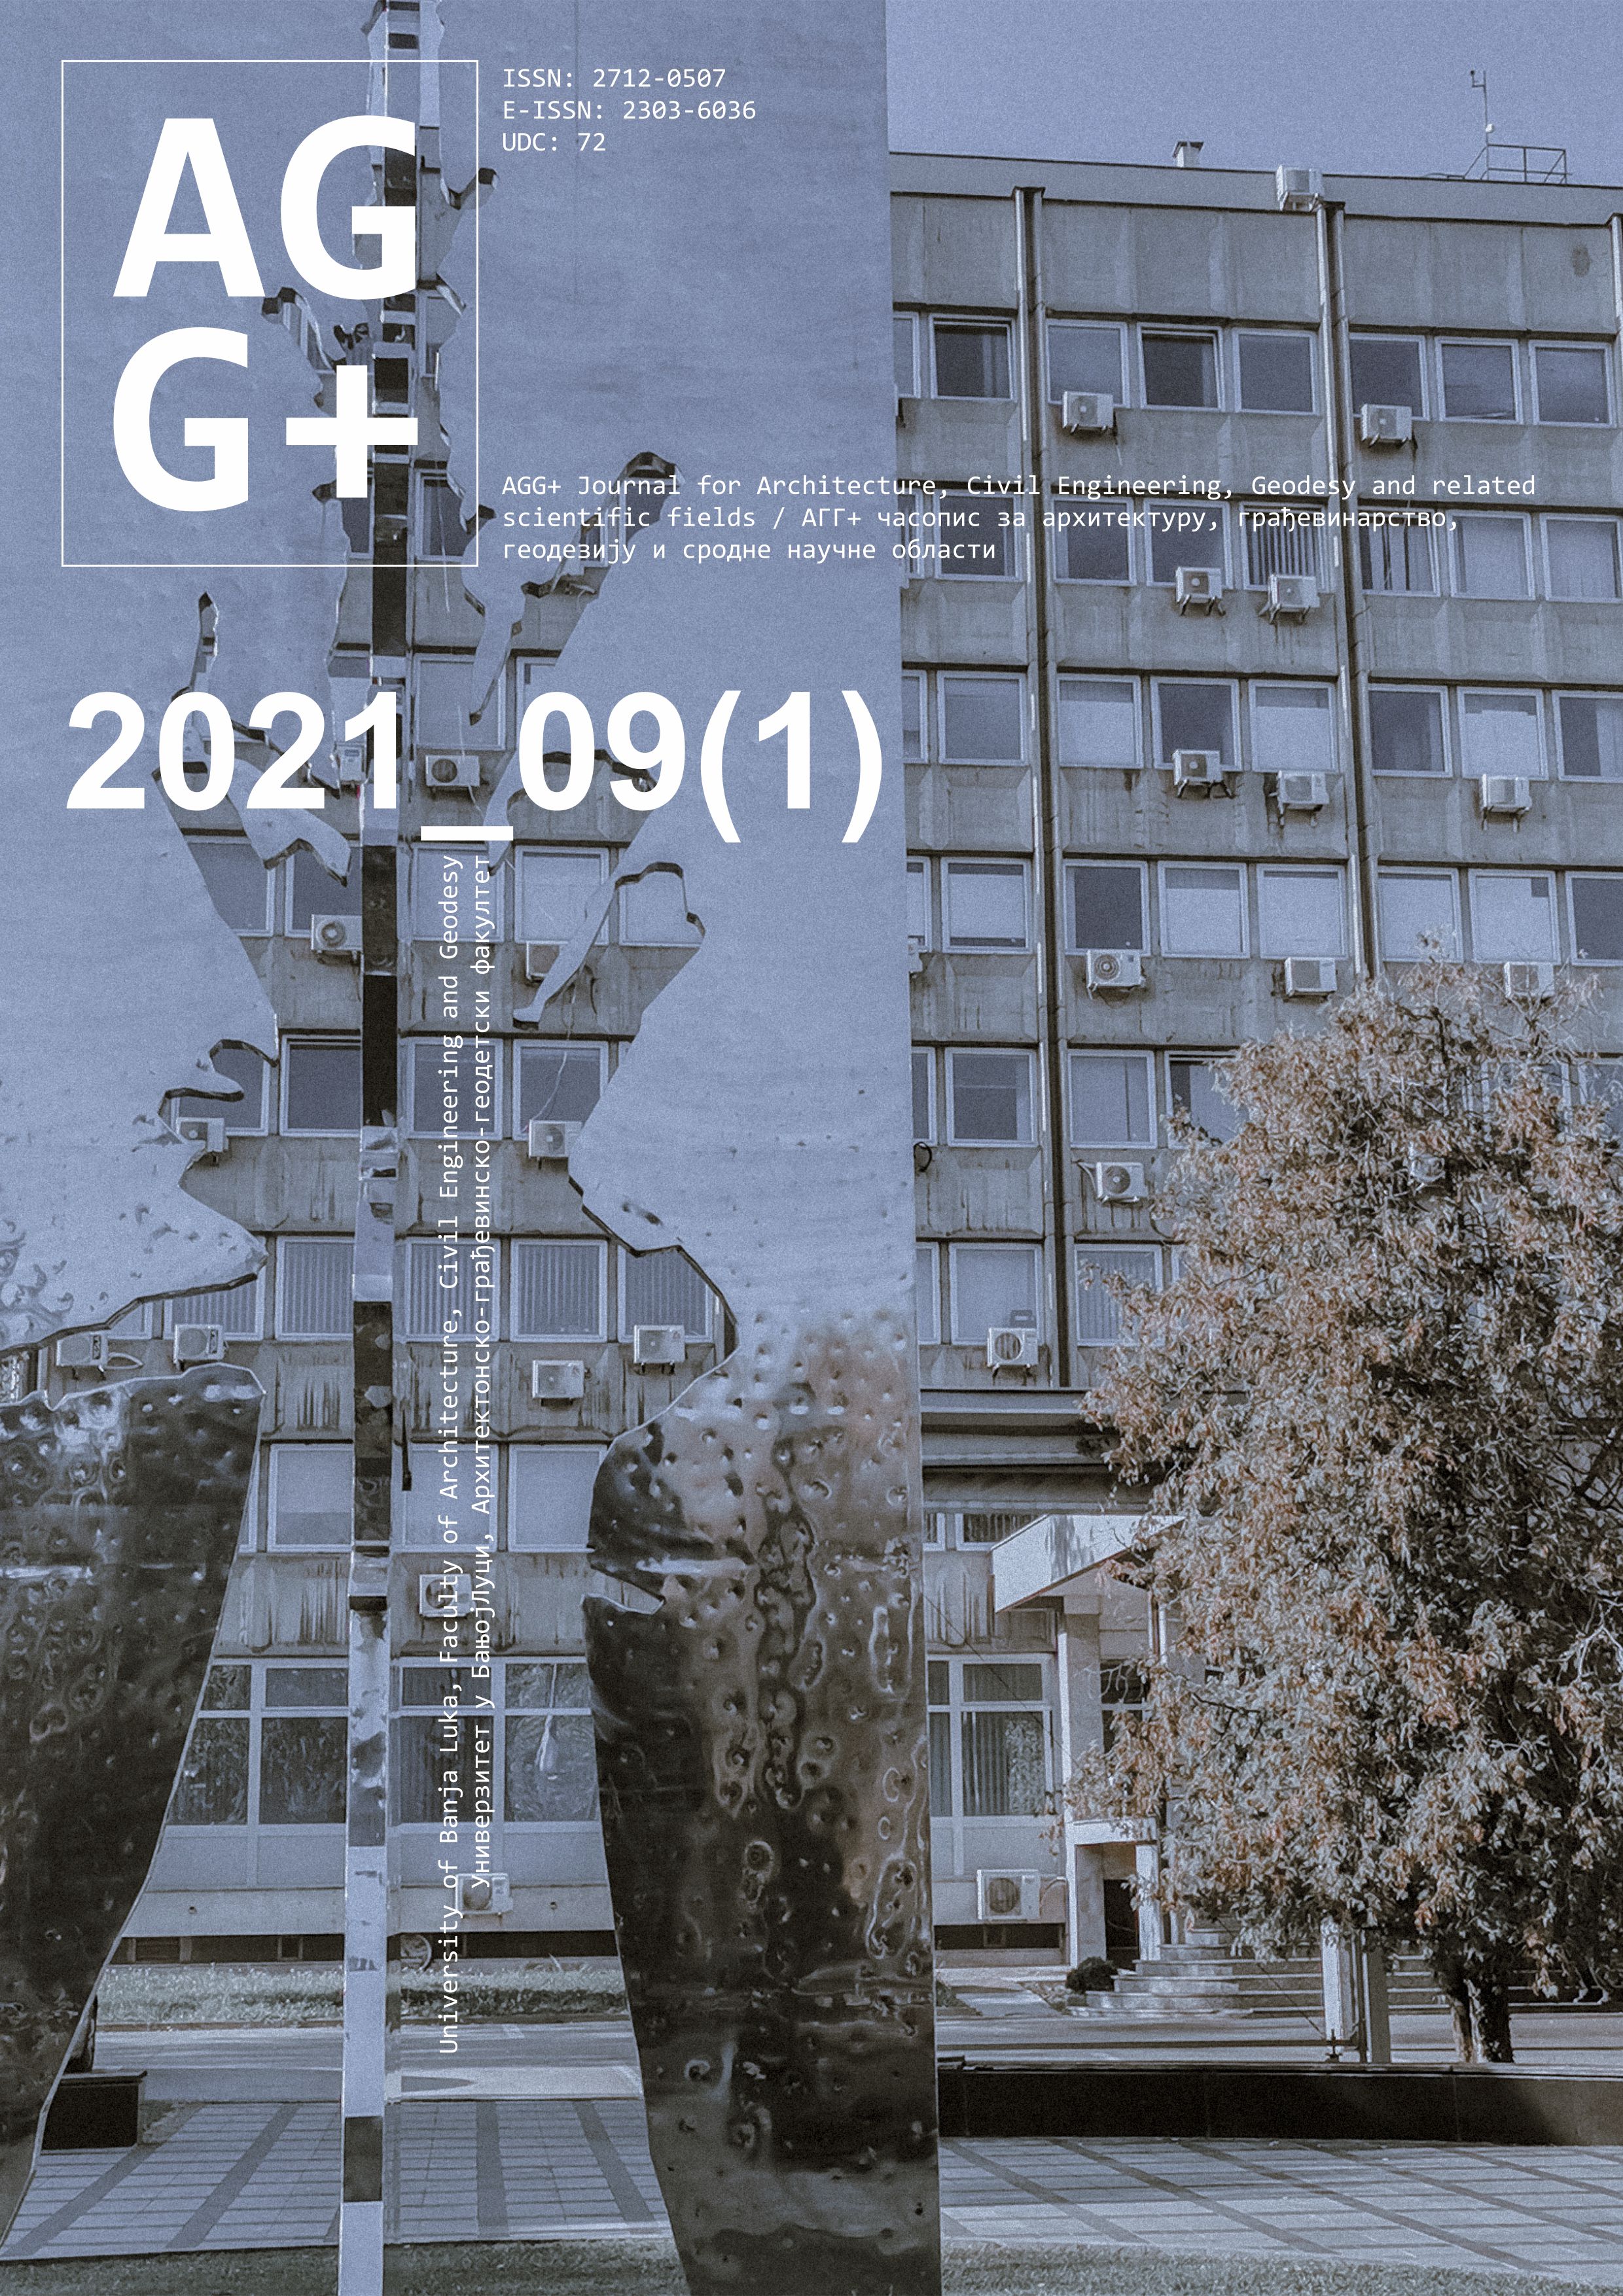 					View Vol. 9 No. 1 (2021): АGG+ Journal for Architecture, Civil Engineering, Geodesy and Related Scientific Fields
				